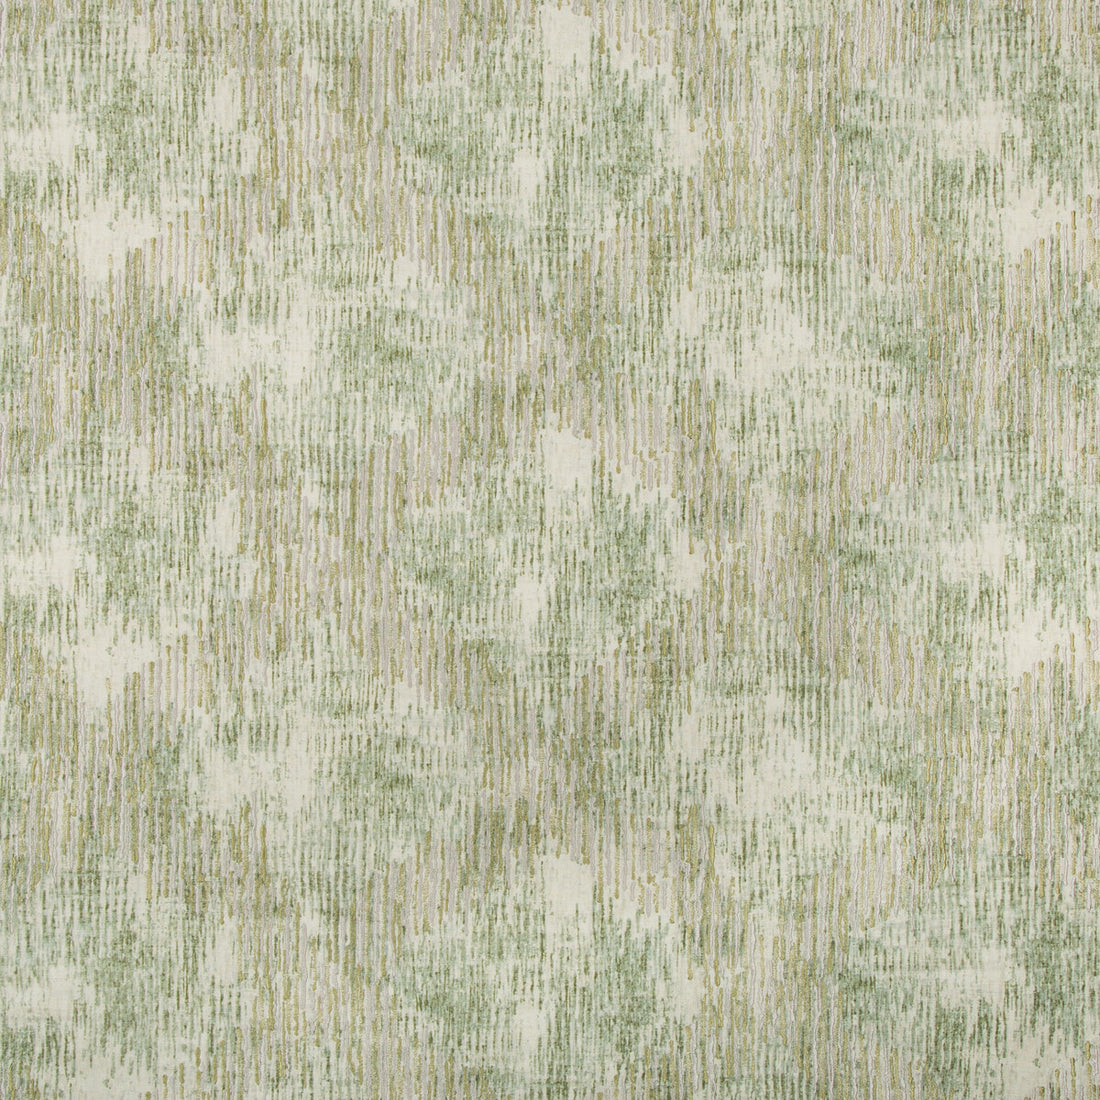 Shimmersea fabric in watercress color - pattern SHIMMERSEA.13.0 - by Kravet Design in the Barbara Barry Home Midsummer collection